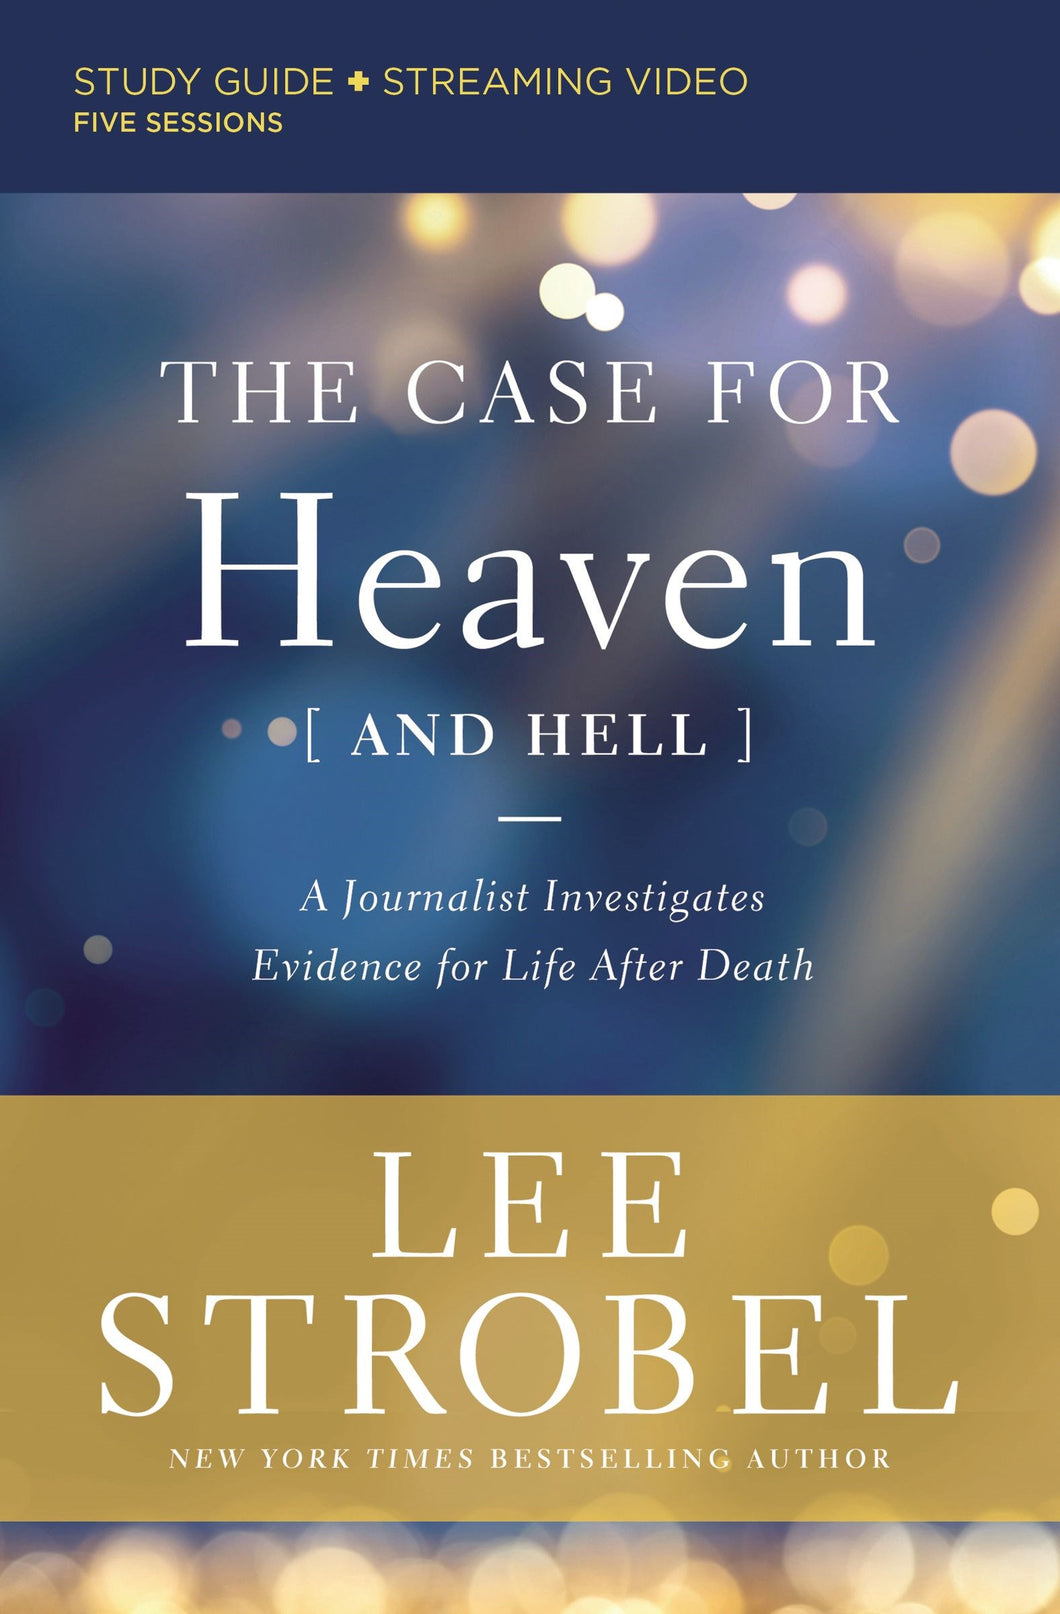 The Case For Heaven (And Hell) Study Guide + Streaming Video